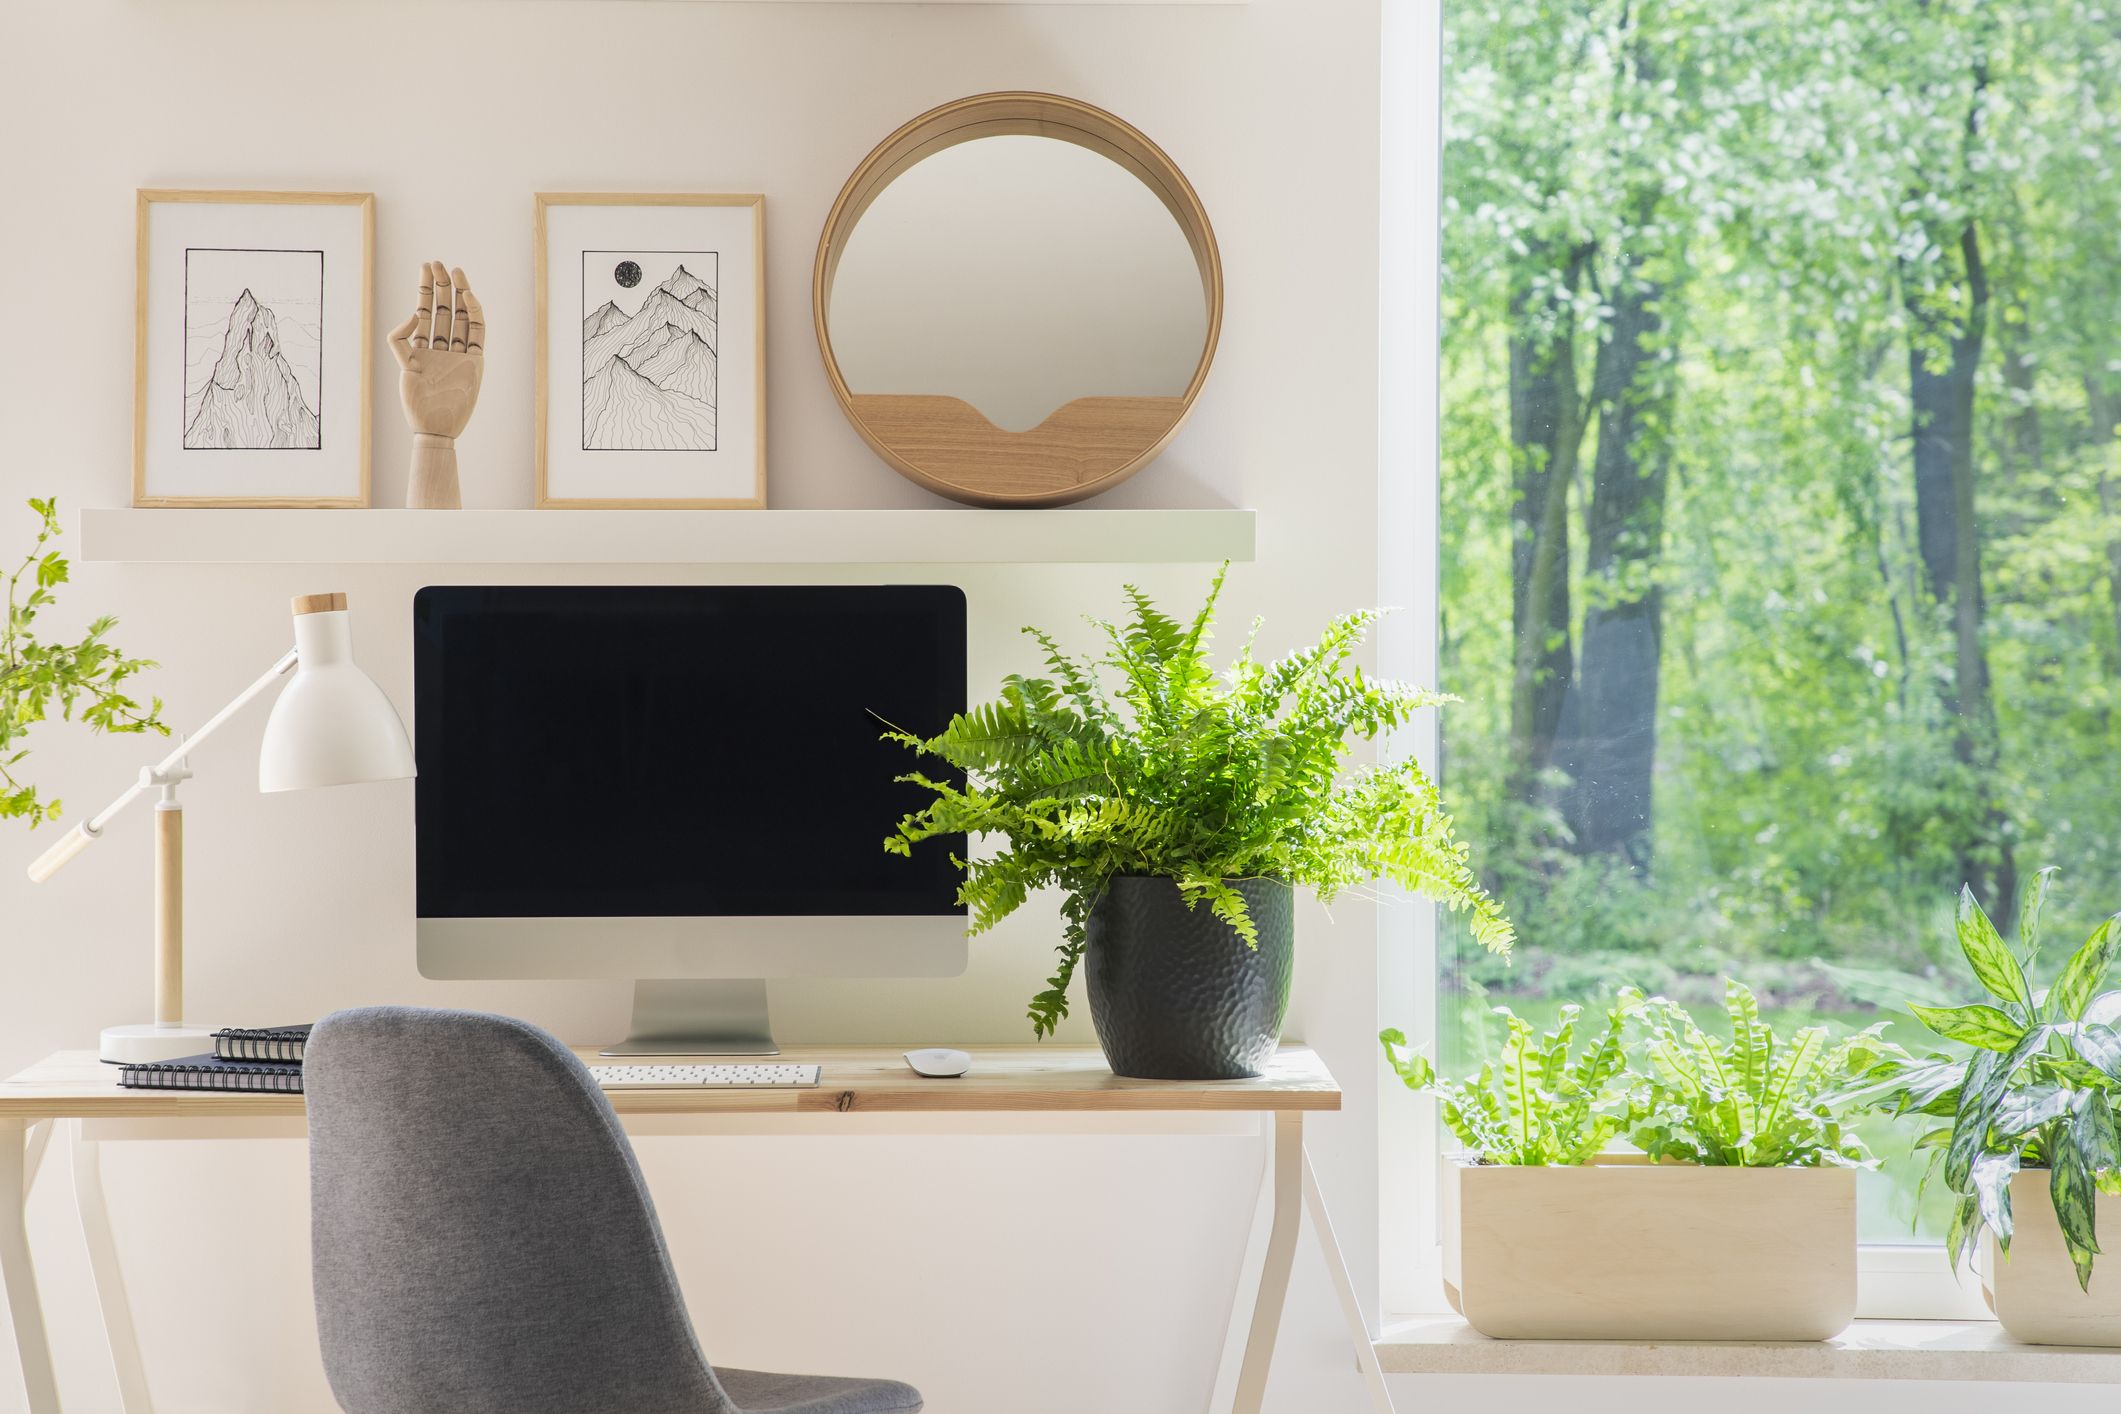 Low-maintenance indoor plants are a great way to warm up your office and work environment